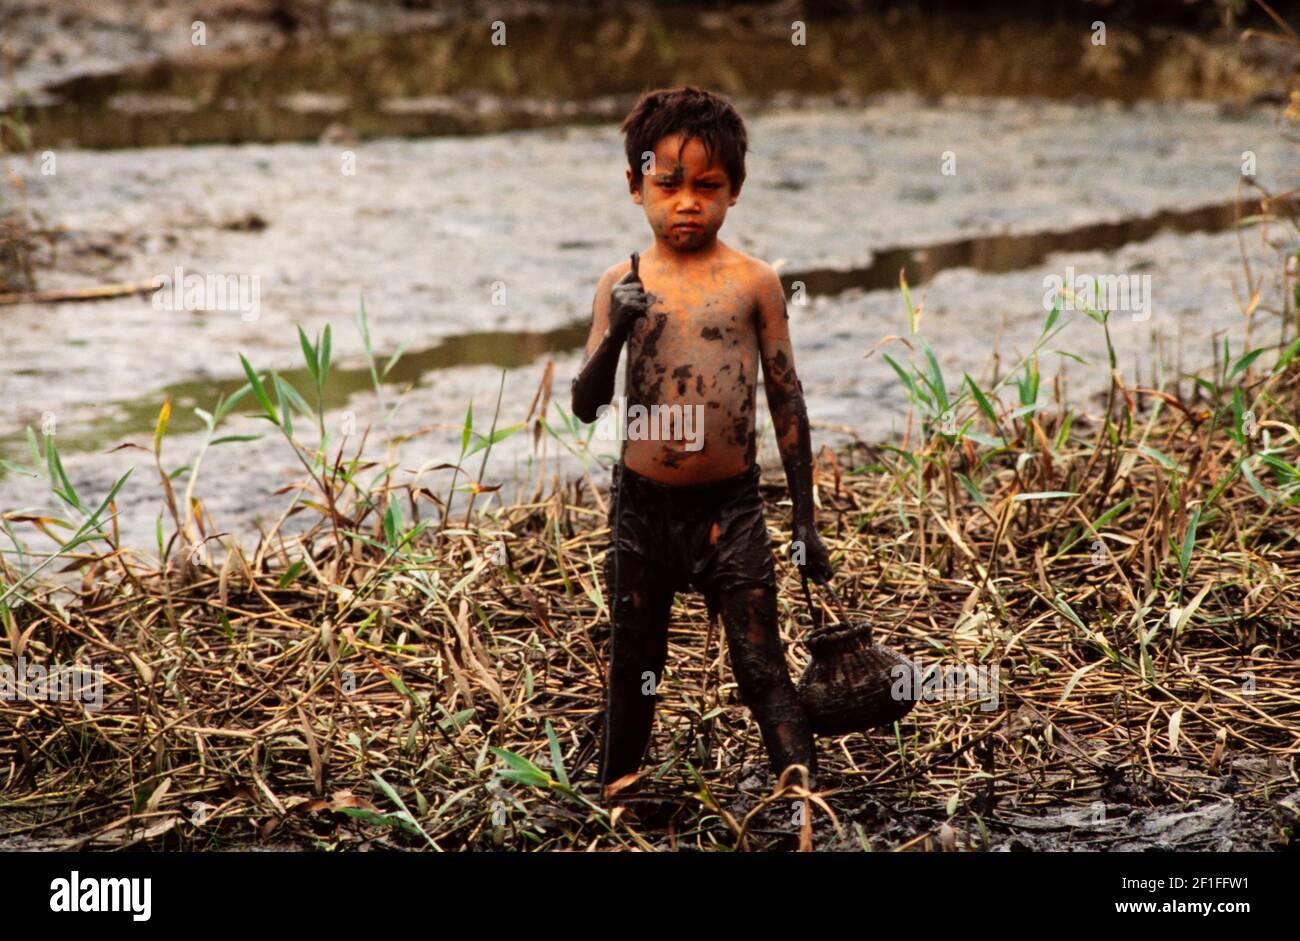 A young boy in the deep mud of his family's ricew paddy hunting for crabs,  rural south Vietnam, June 1980 Stock Photo